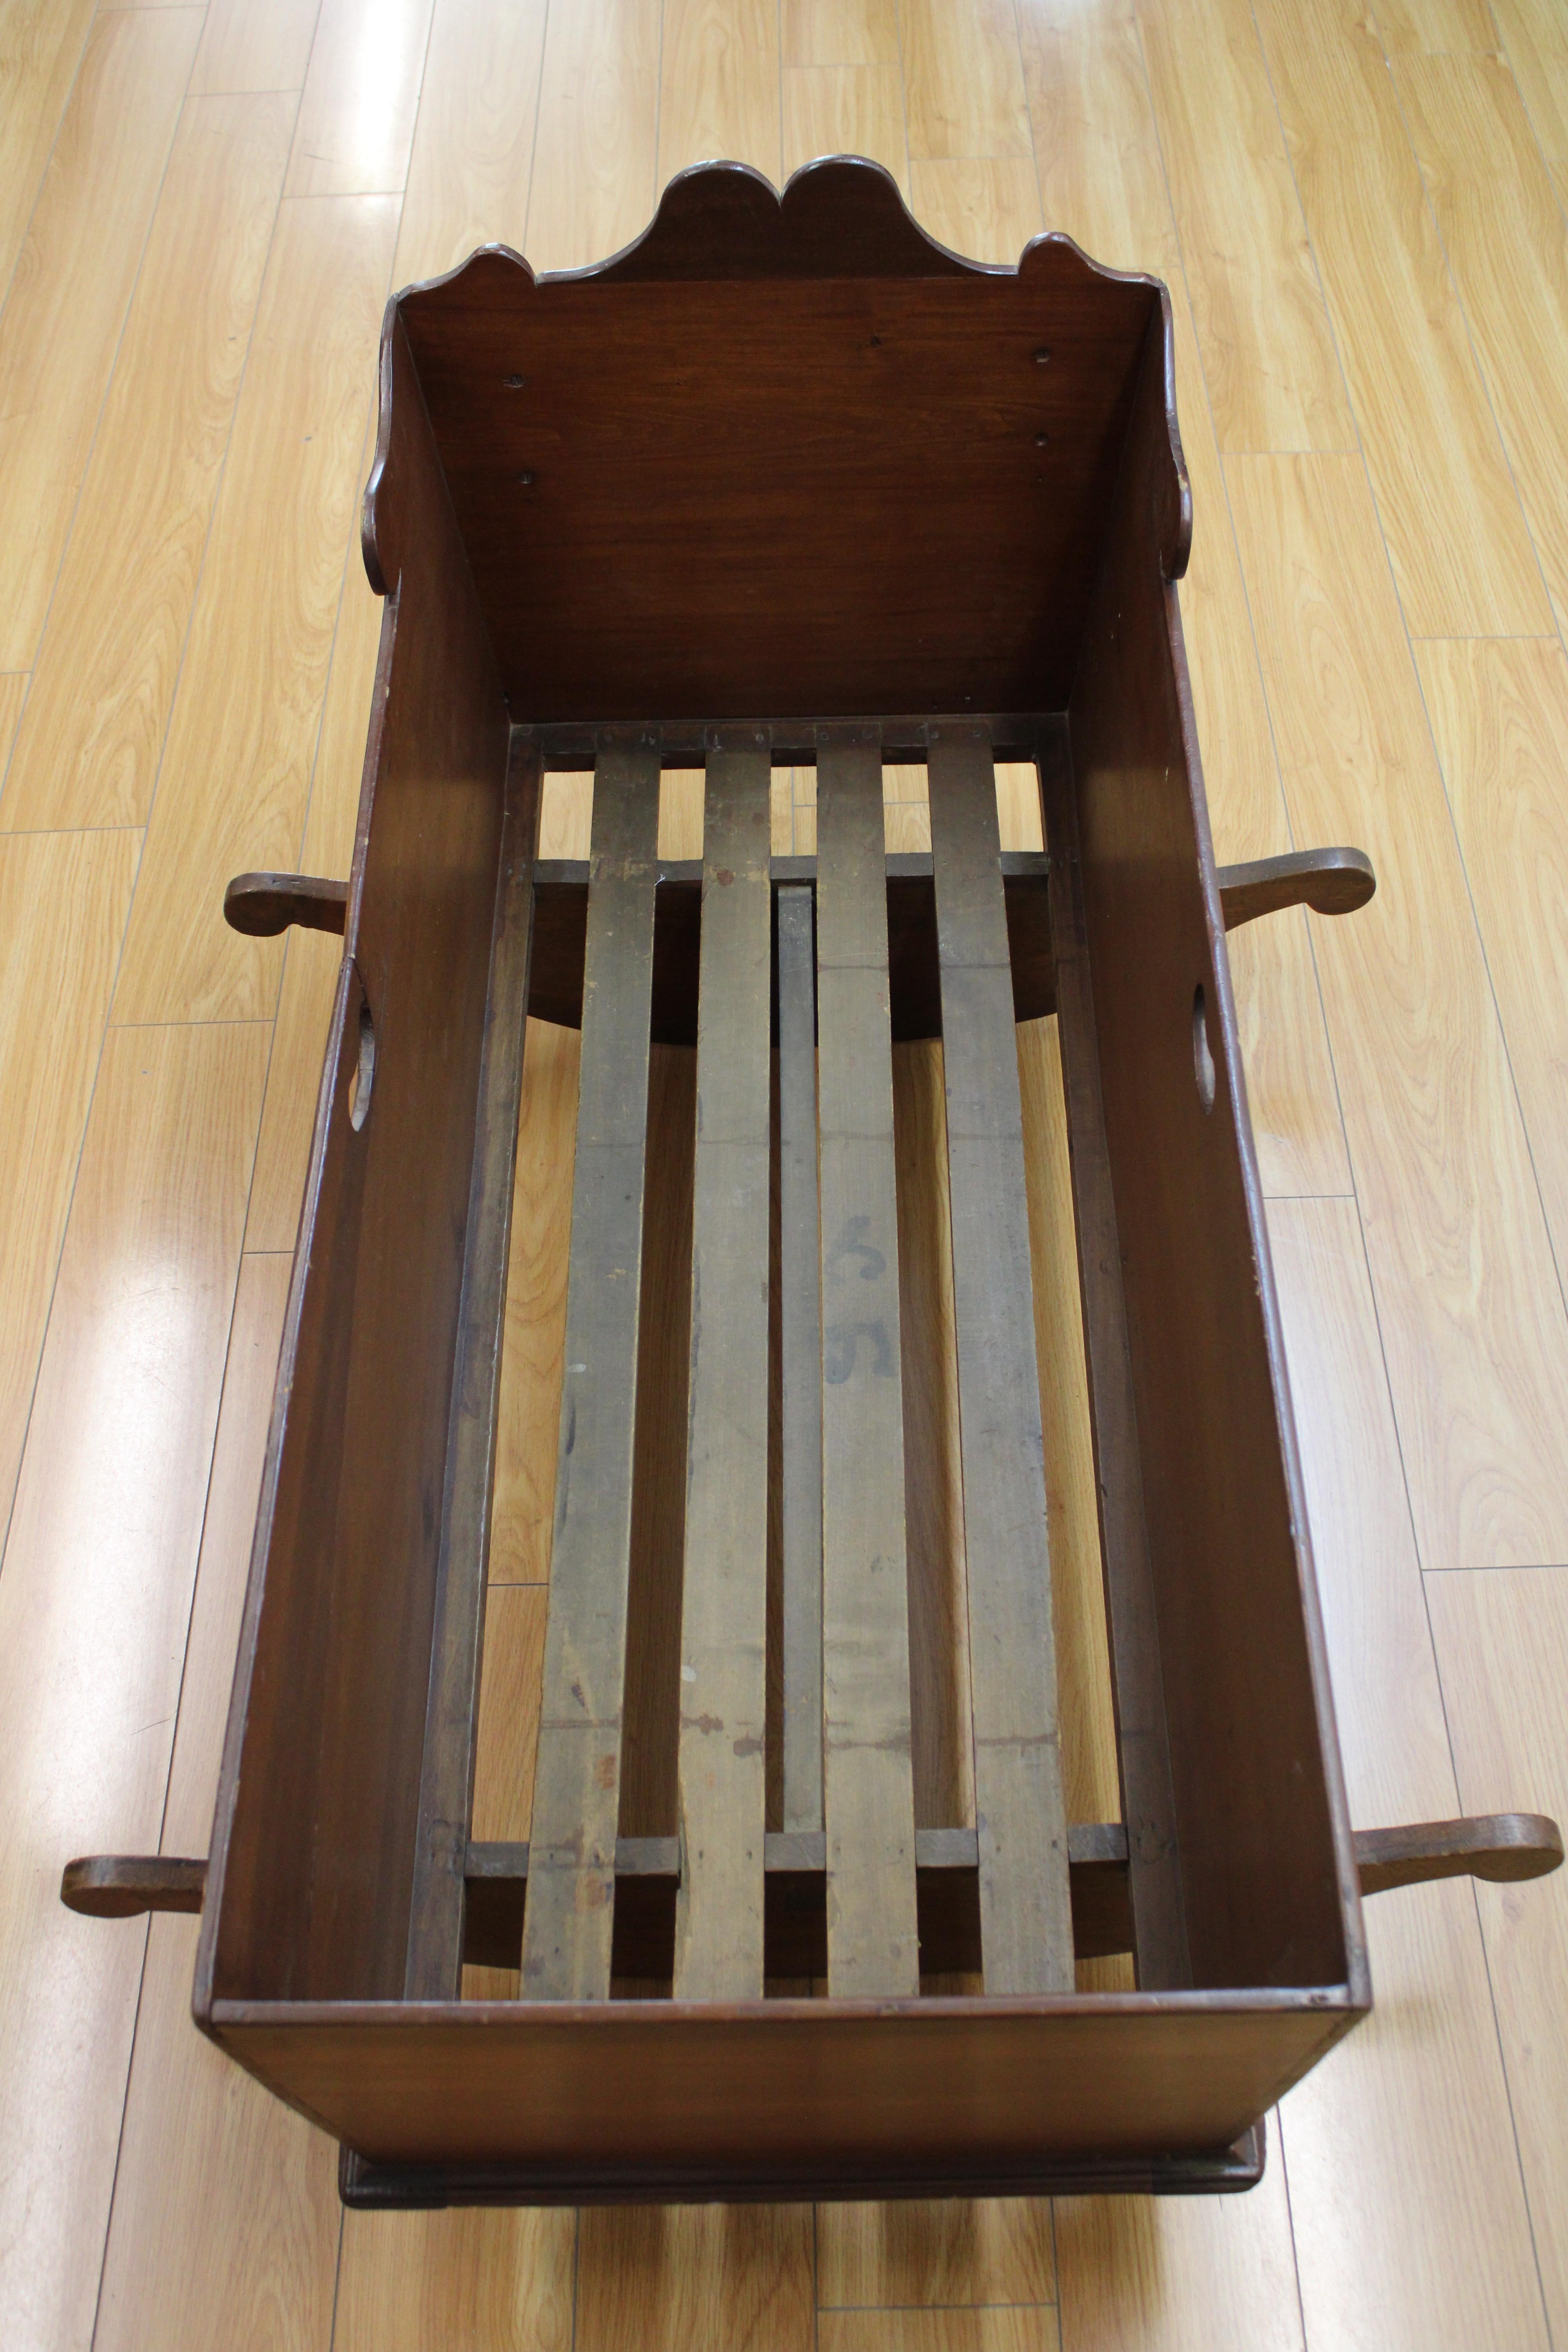 C. 19th Century

Adorable American Federal Tulip Poplar & Walnut Carved Cradle 

Possible Provenance ( Middleton, DE. )

Dimensions Slightly Different From leg to Leg
44 W / 33.50 D / 26. 50 H.